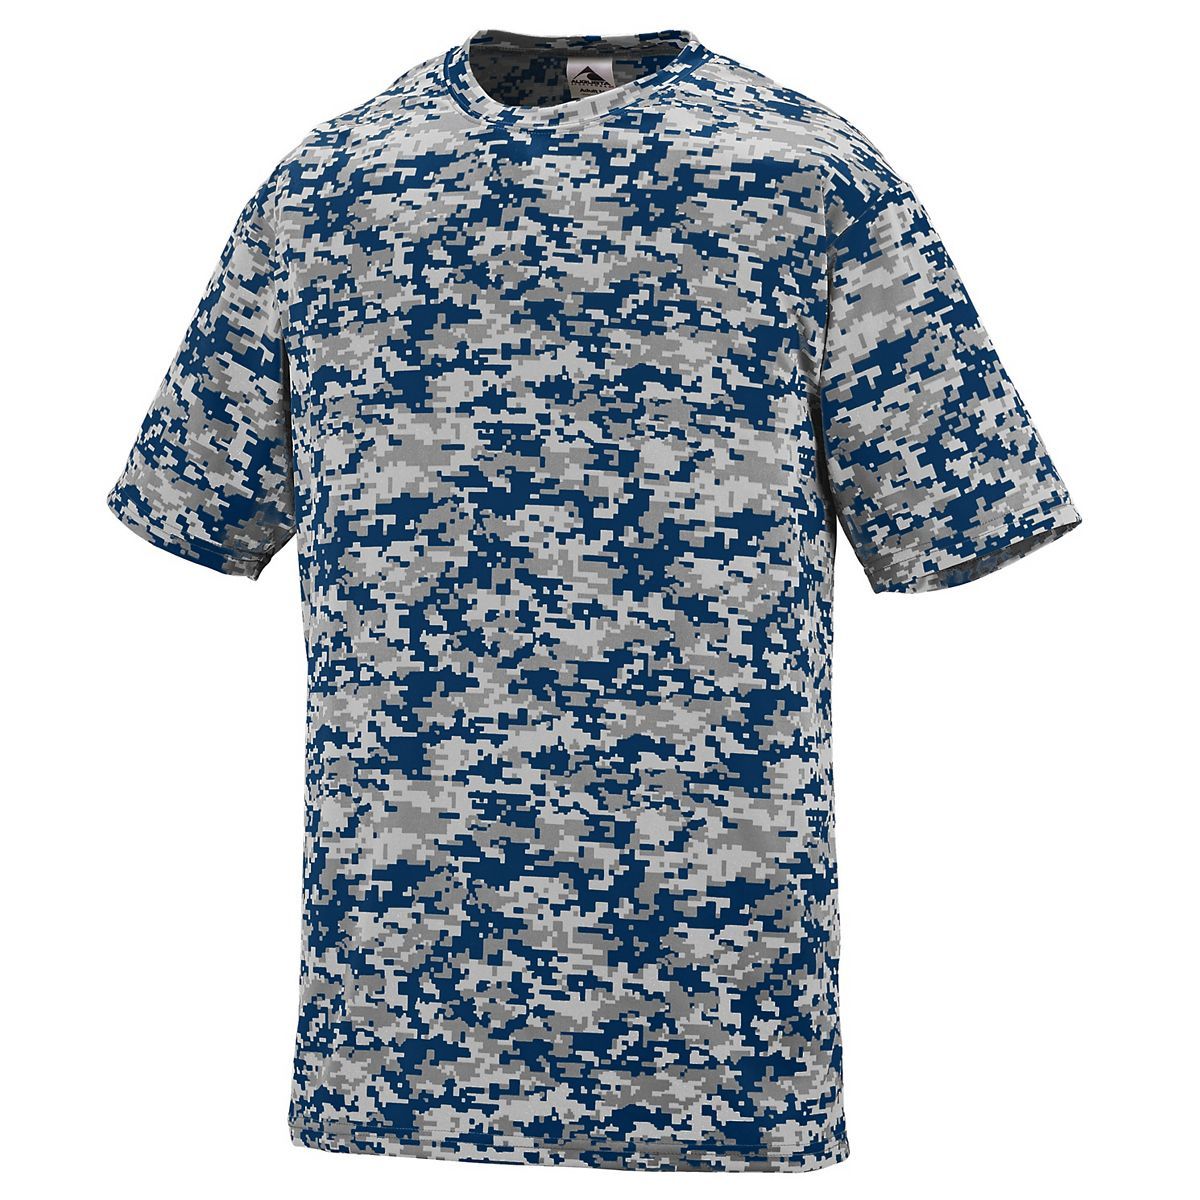 Augusta Sportswear Youth Digi Camo Wicking T-Shirt in Navy Digi  -Part of the Youth, Youth-Tee-Shirt, T-Shirts, Augusta-Products, Shirts product lines at KanaleyCreations.com